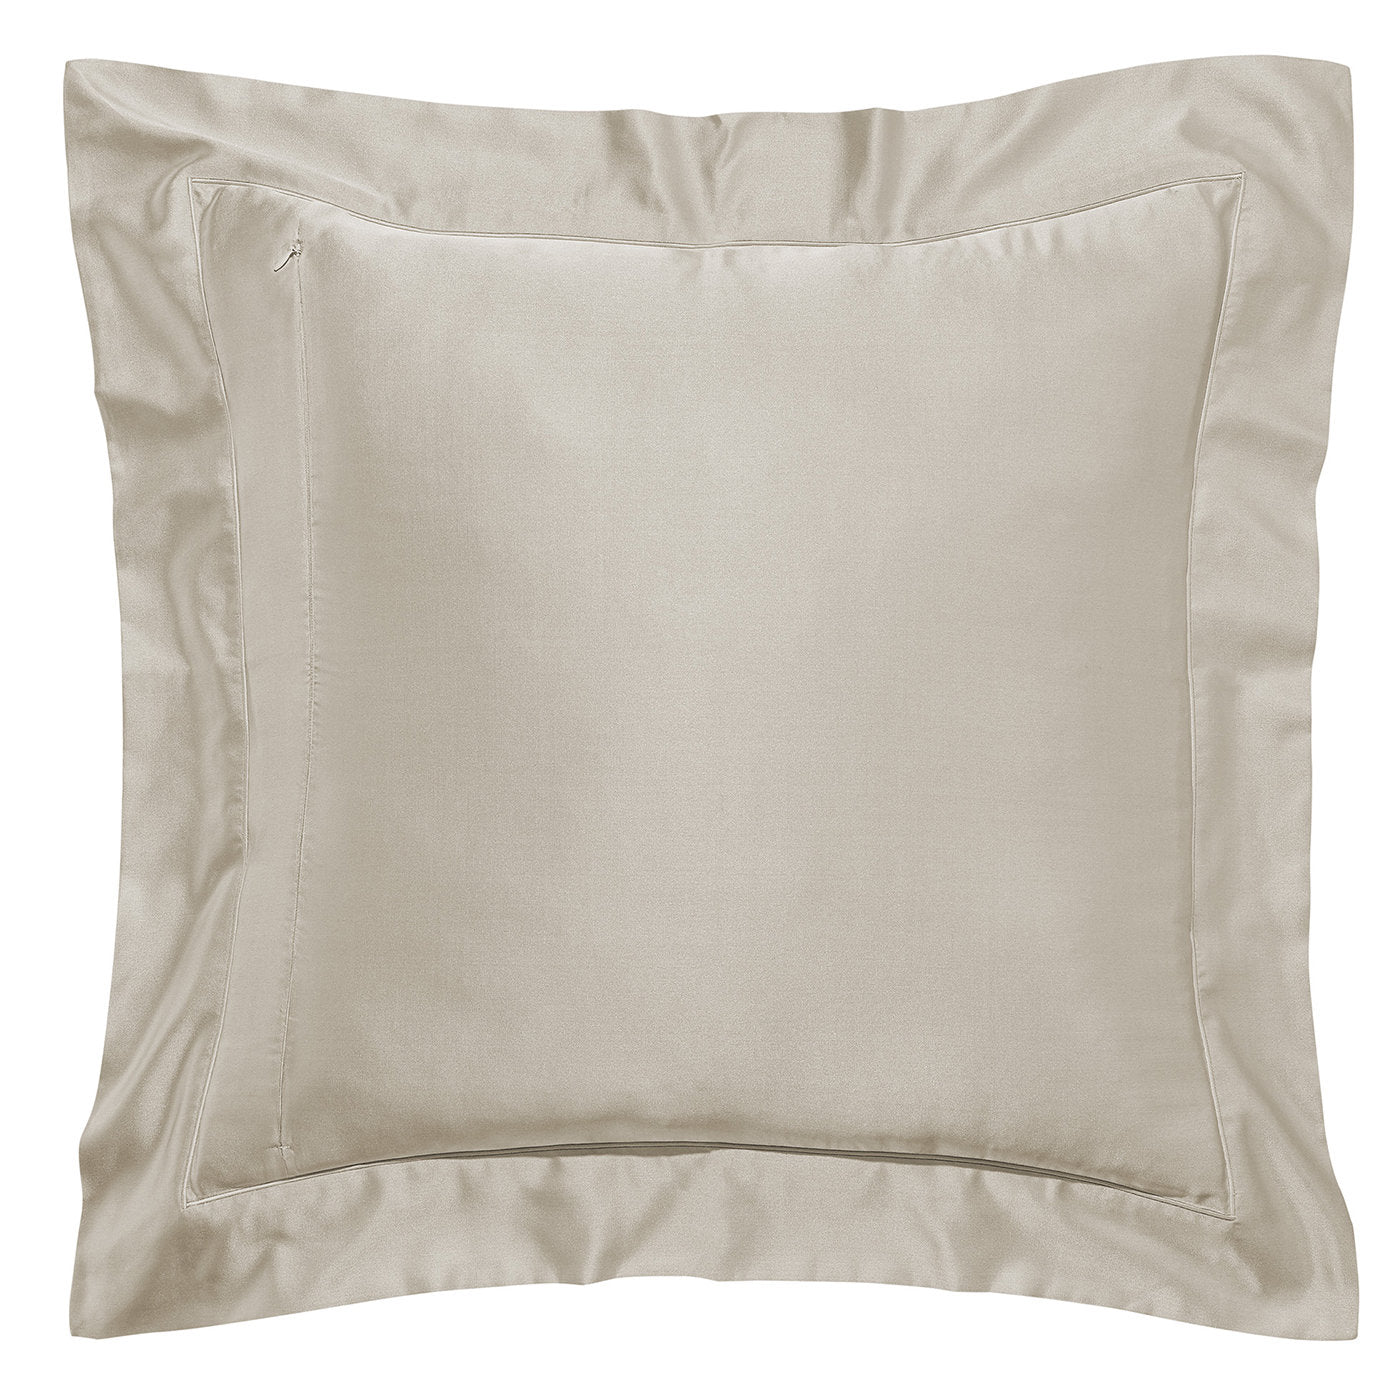 Solid Teal Pillow Case  - Alternative view 1